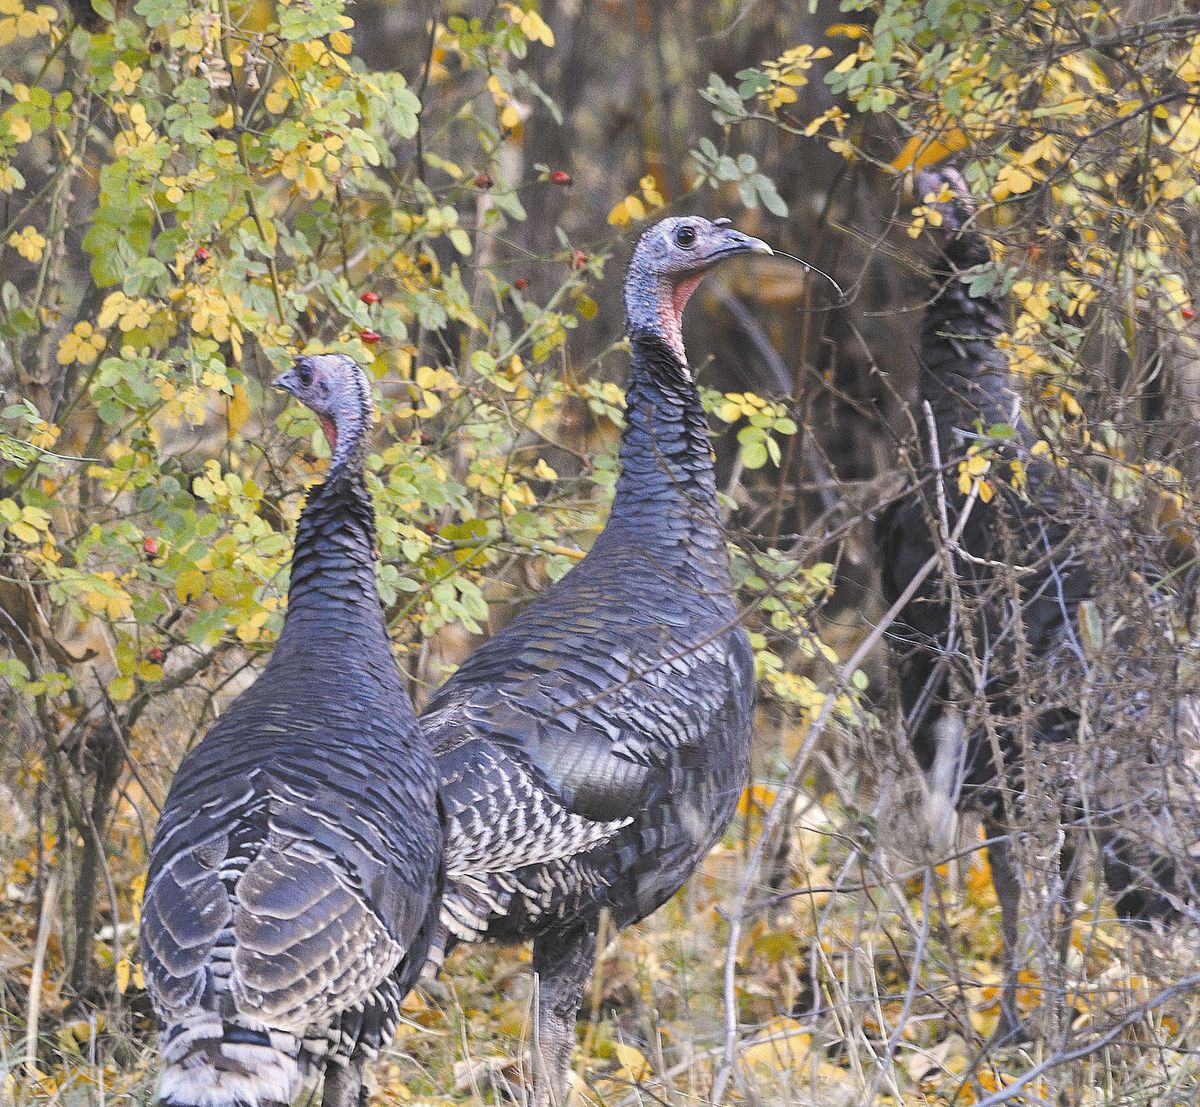 Idaho and Washington have fall turkey hunts – a time when birds assemble into large groups – underway and running into December. (STEVE HANKS)